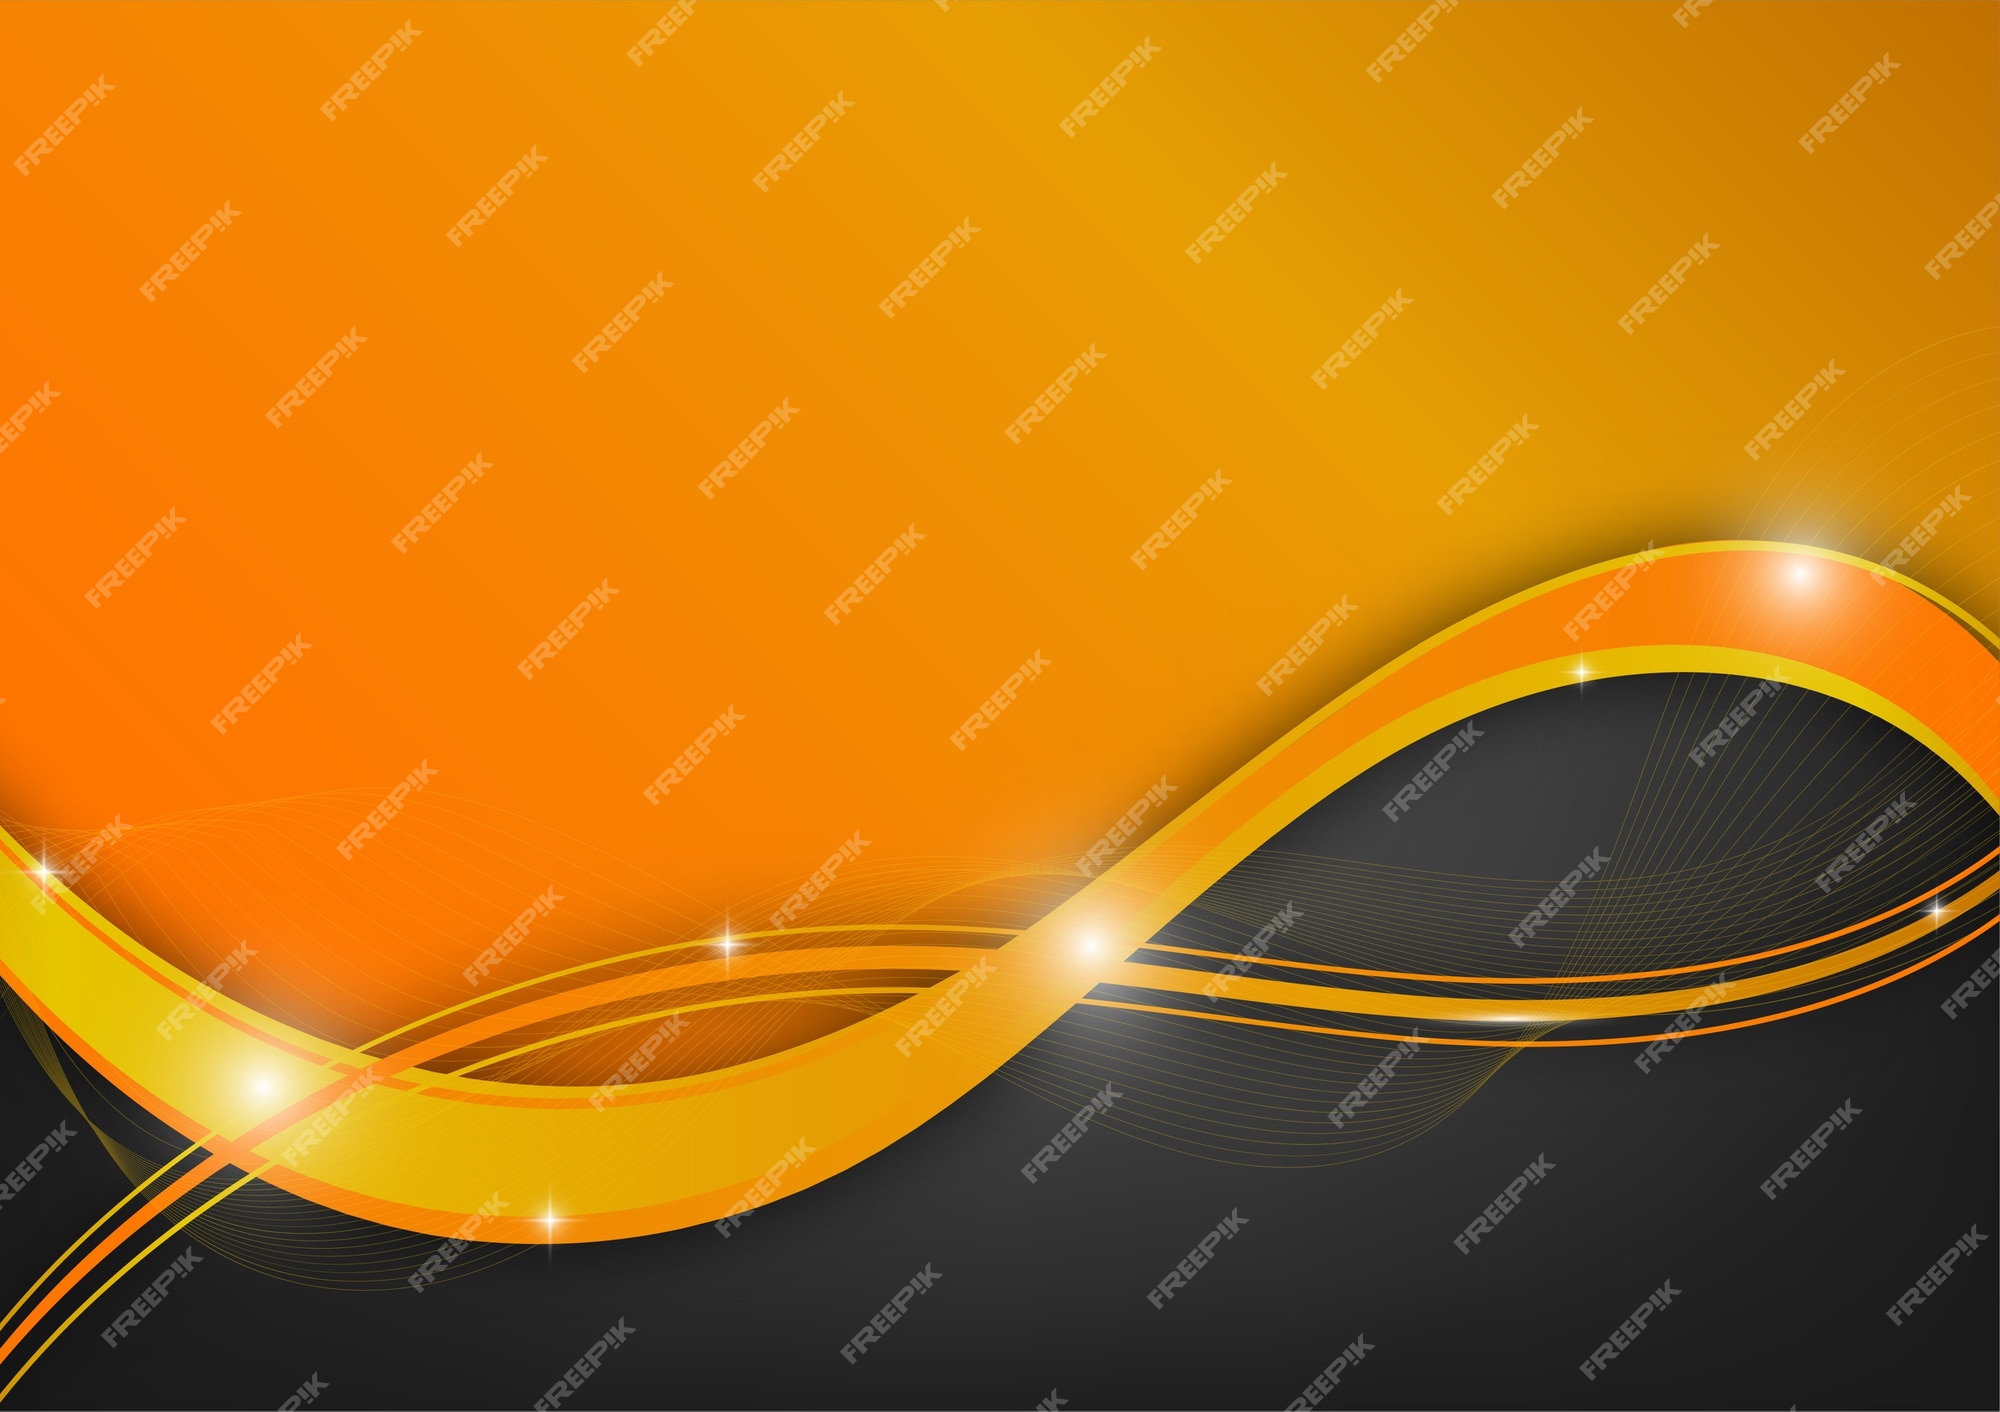 Premium Vector Orange And Black Wave Abstract Vector Background With Copy Space